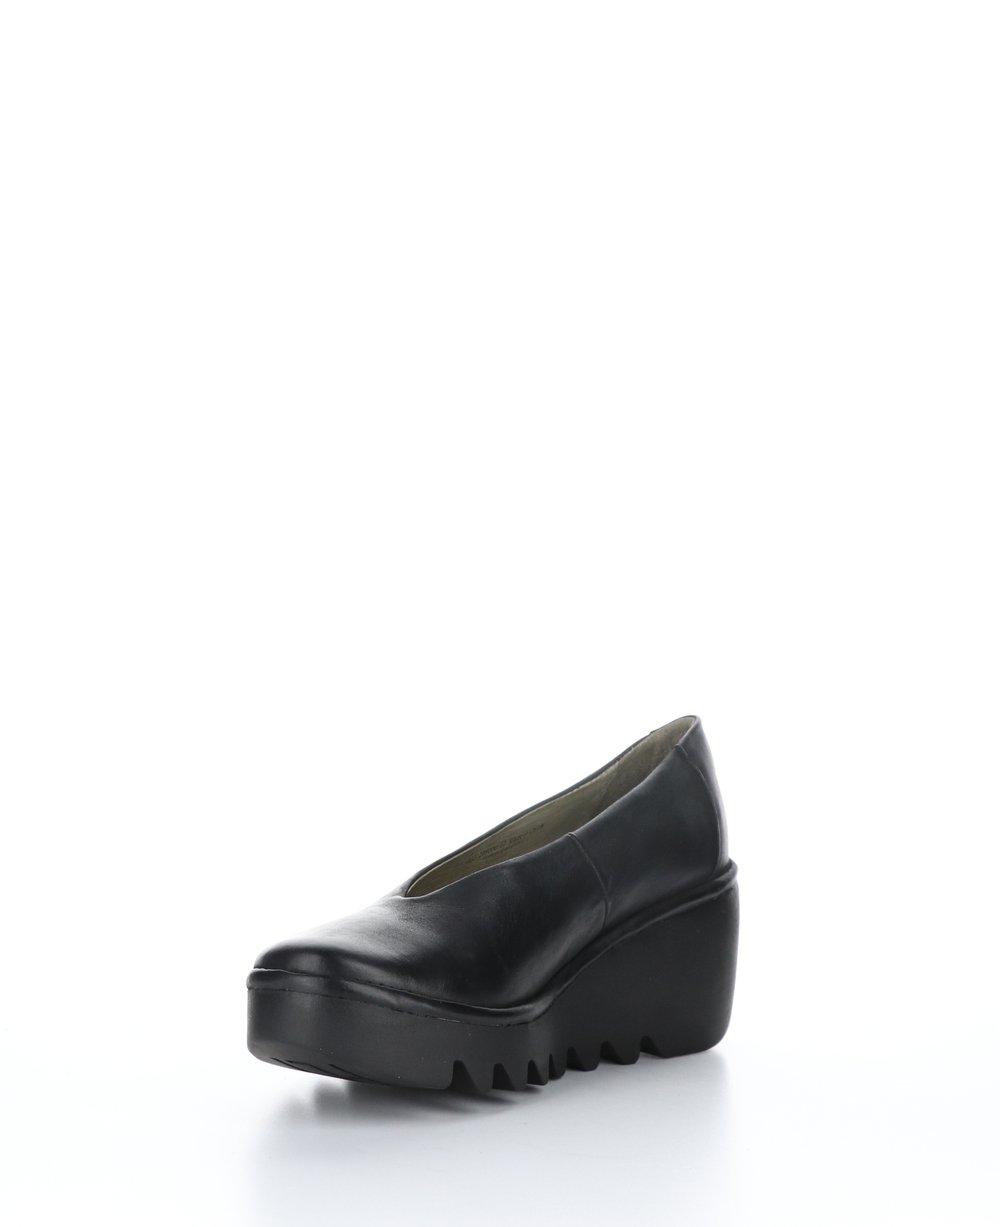 Fly London YBESO246FLY VERONA BLACK WEDGE SHOES